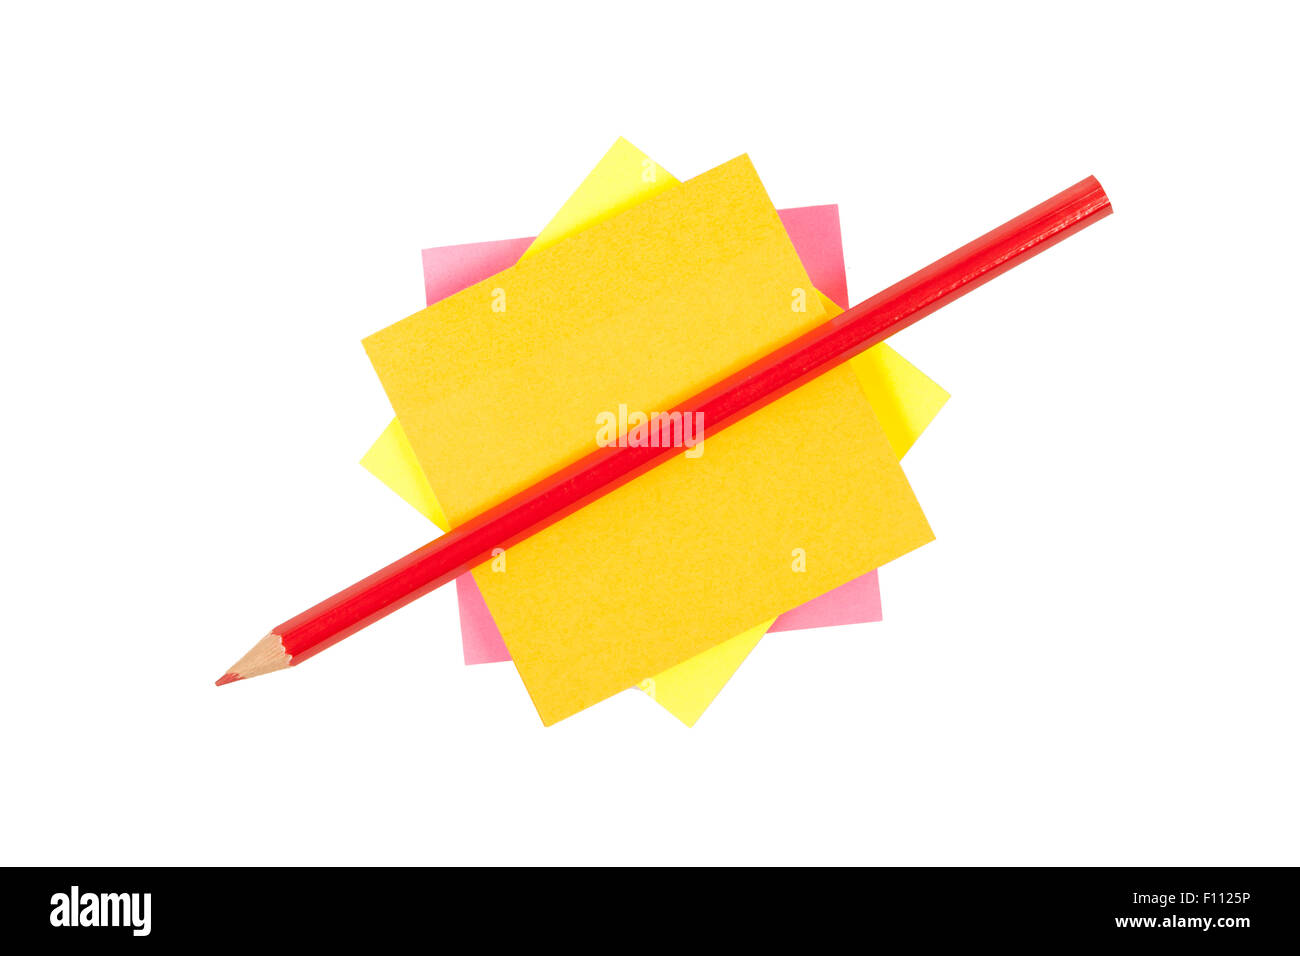 Adhesive label and pencil isolated Stock Photo